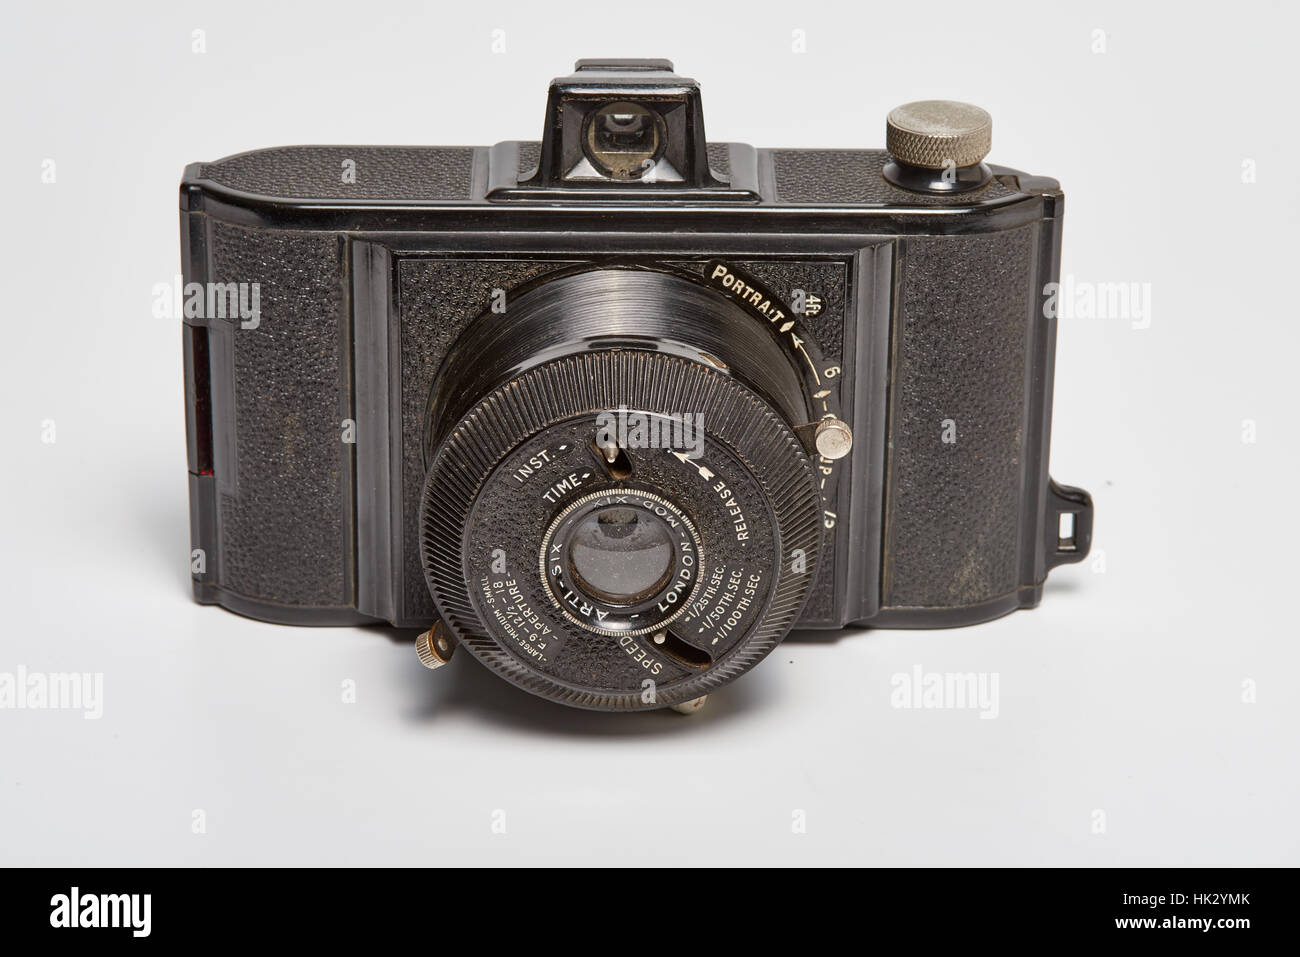 The Arti-Six is a British Bakelite viewfinder camera made around 1950. It had a screw-tube lens - when taking a photograph, the lens is screwed forwar Stock Photo